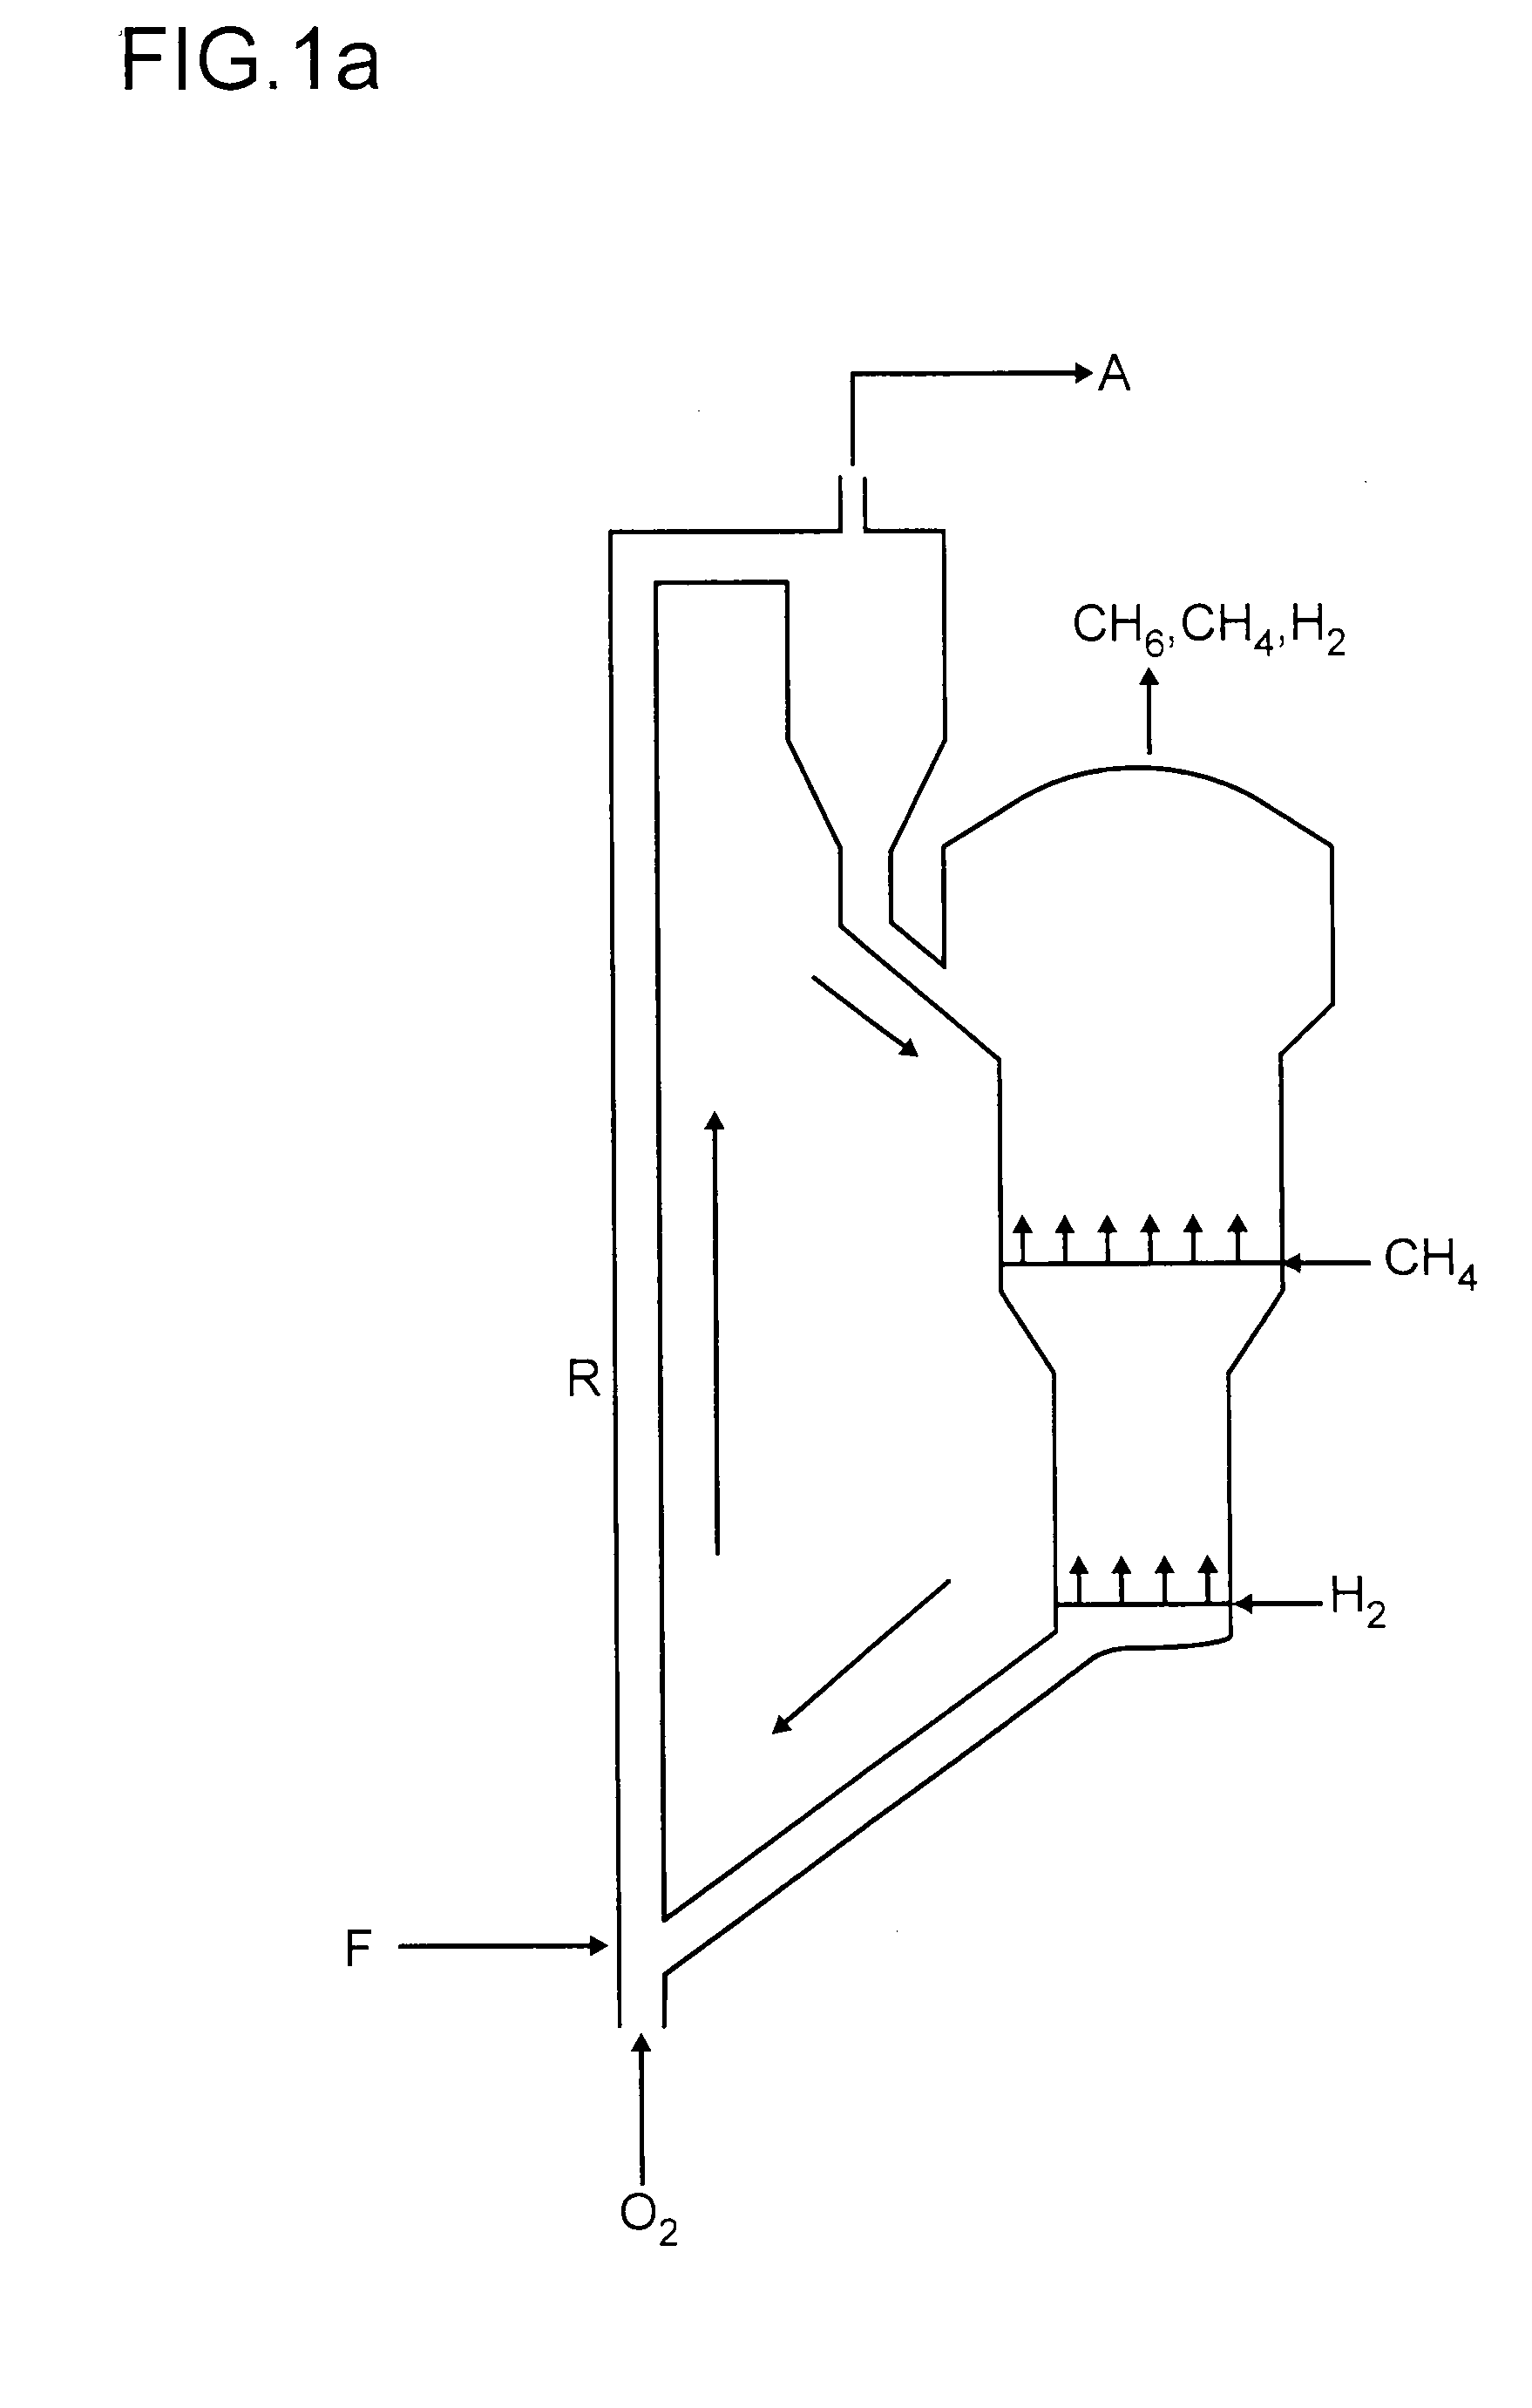 Process for preparing aromatics from methane